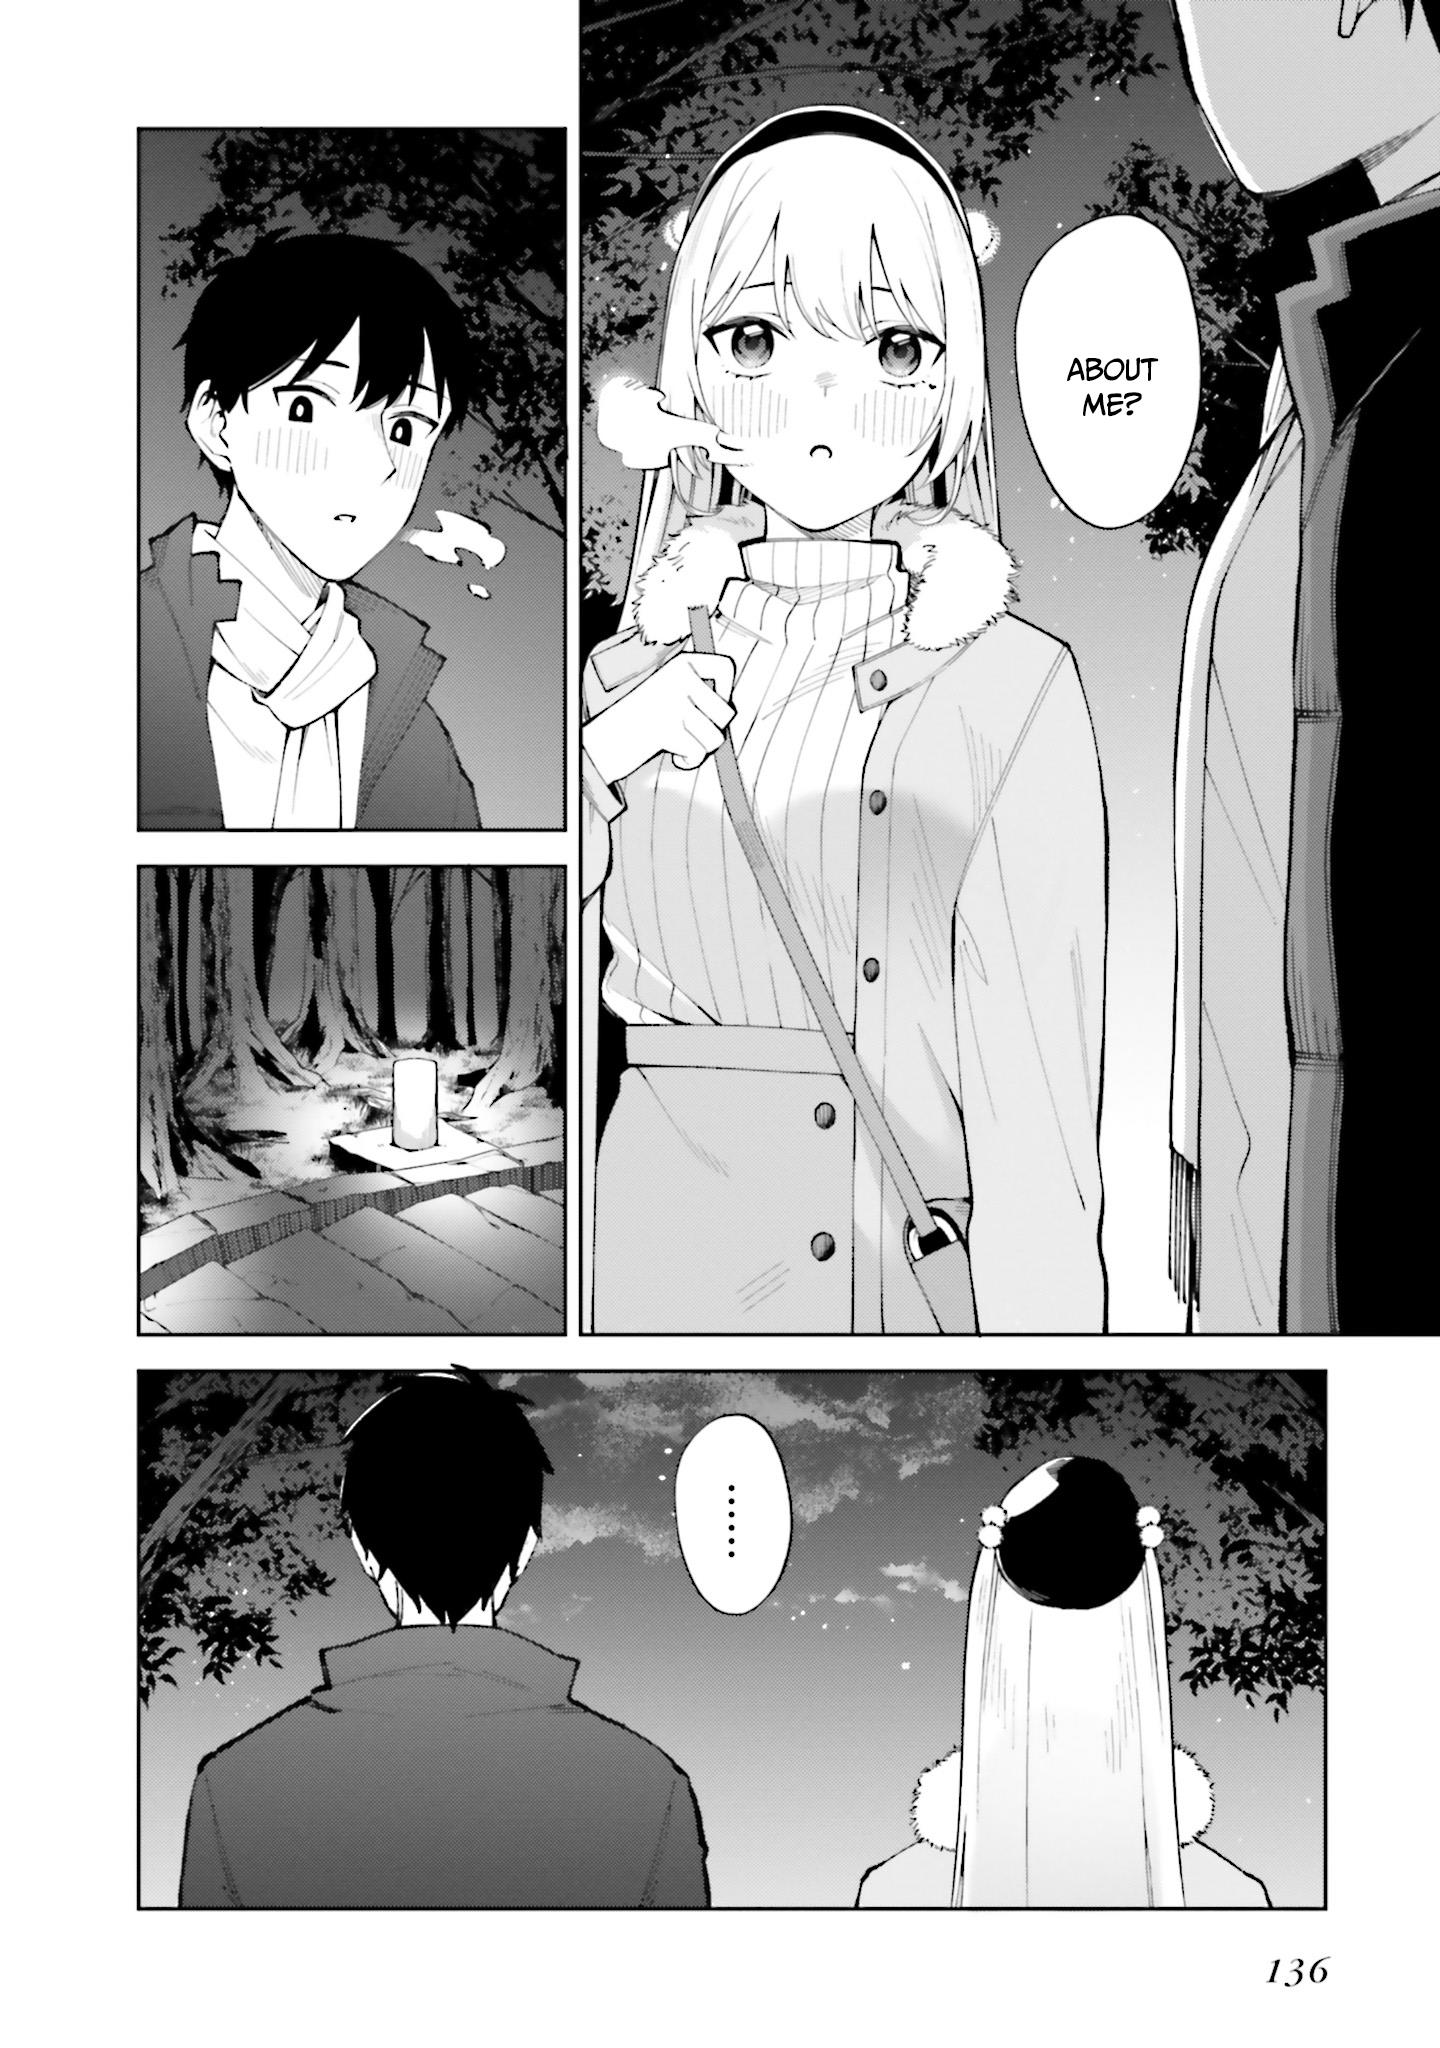 I Don't Understand Shirogane-San's Facial Expression At All Vol.4 Chapter 25: The End. - Picture 3